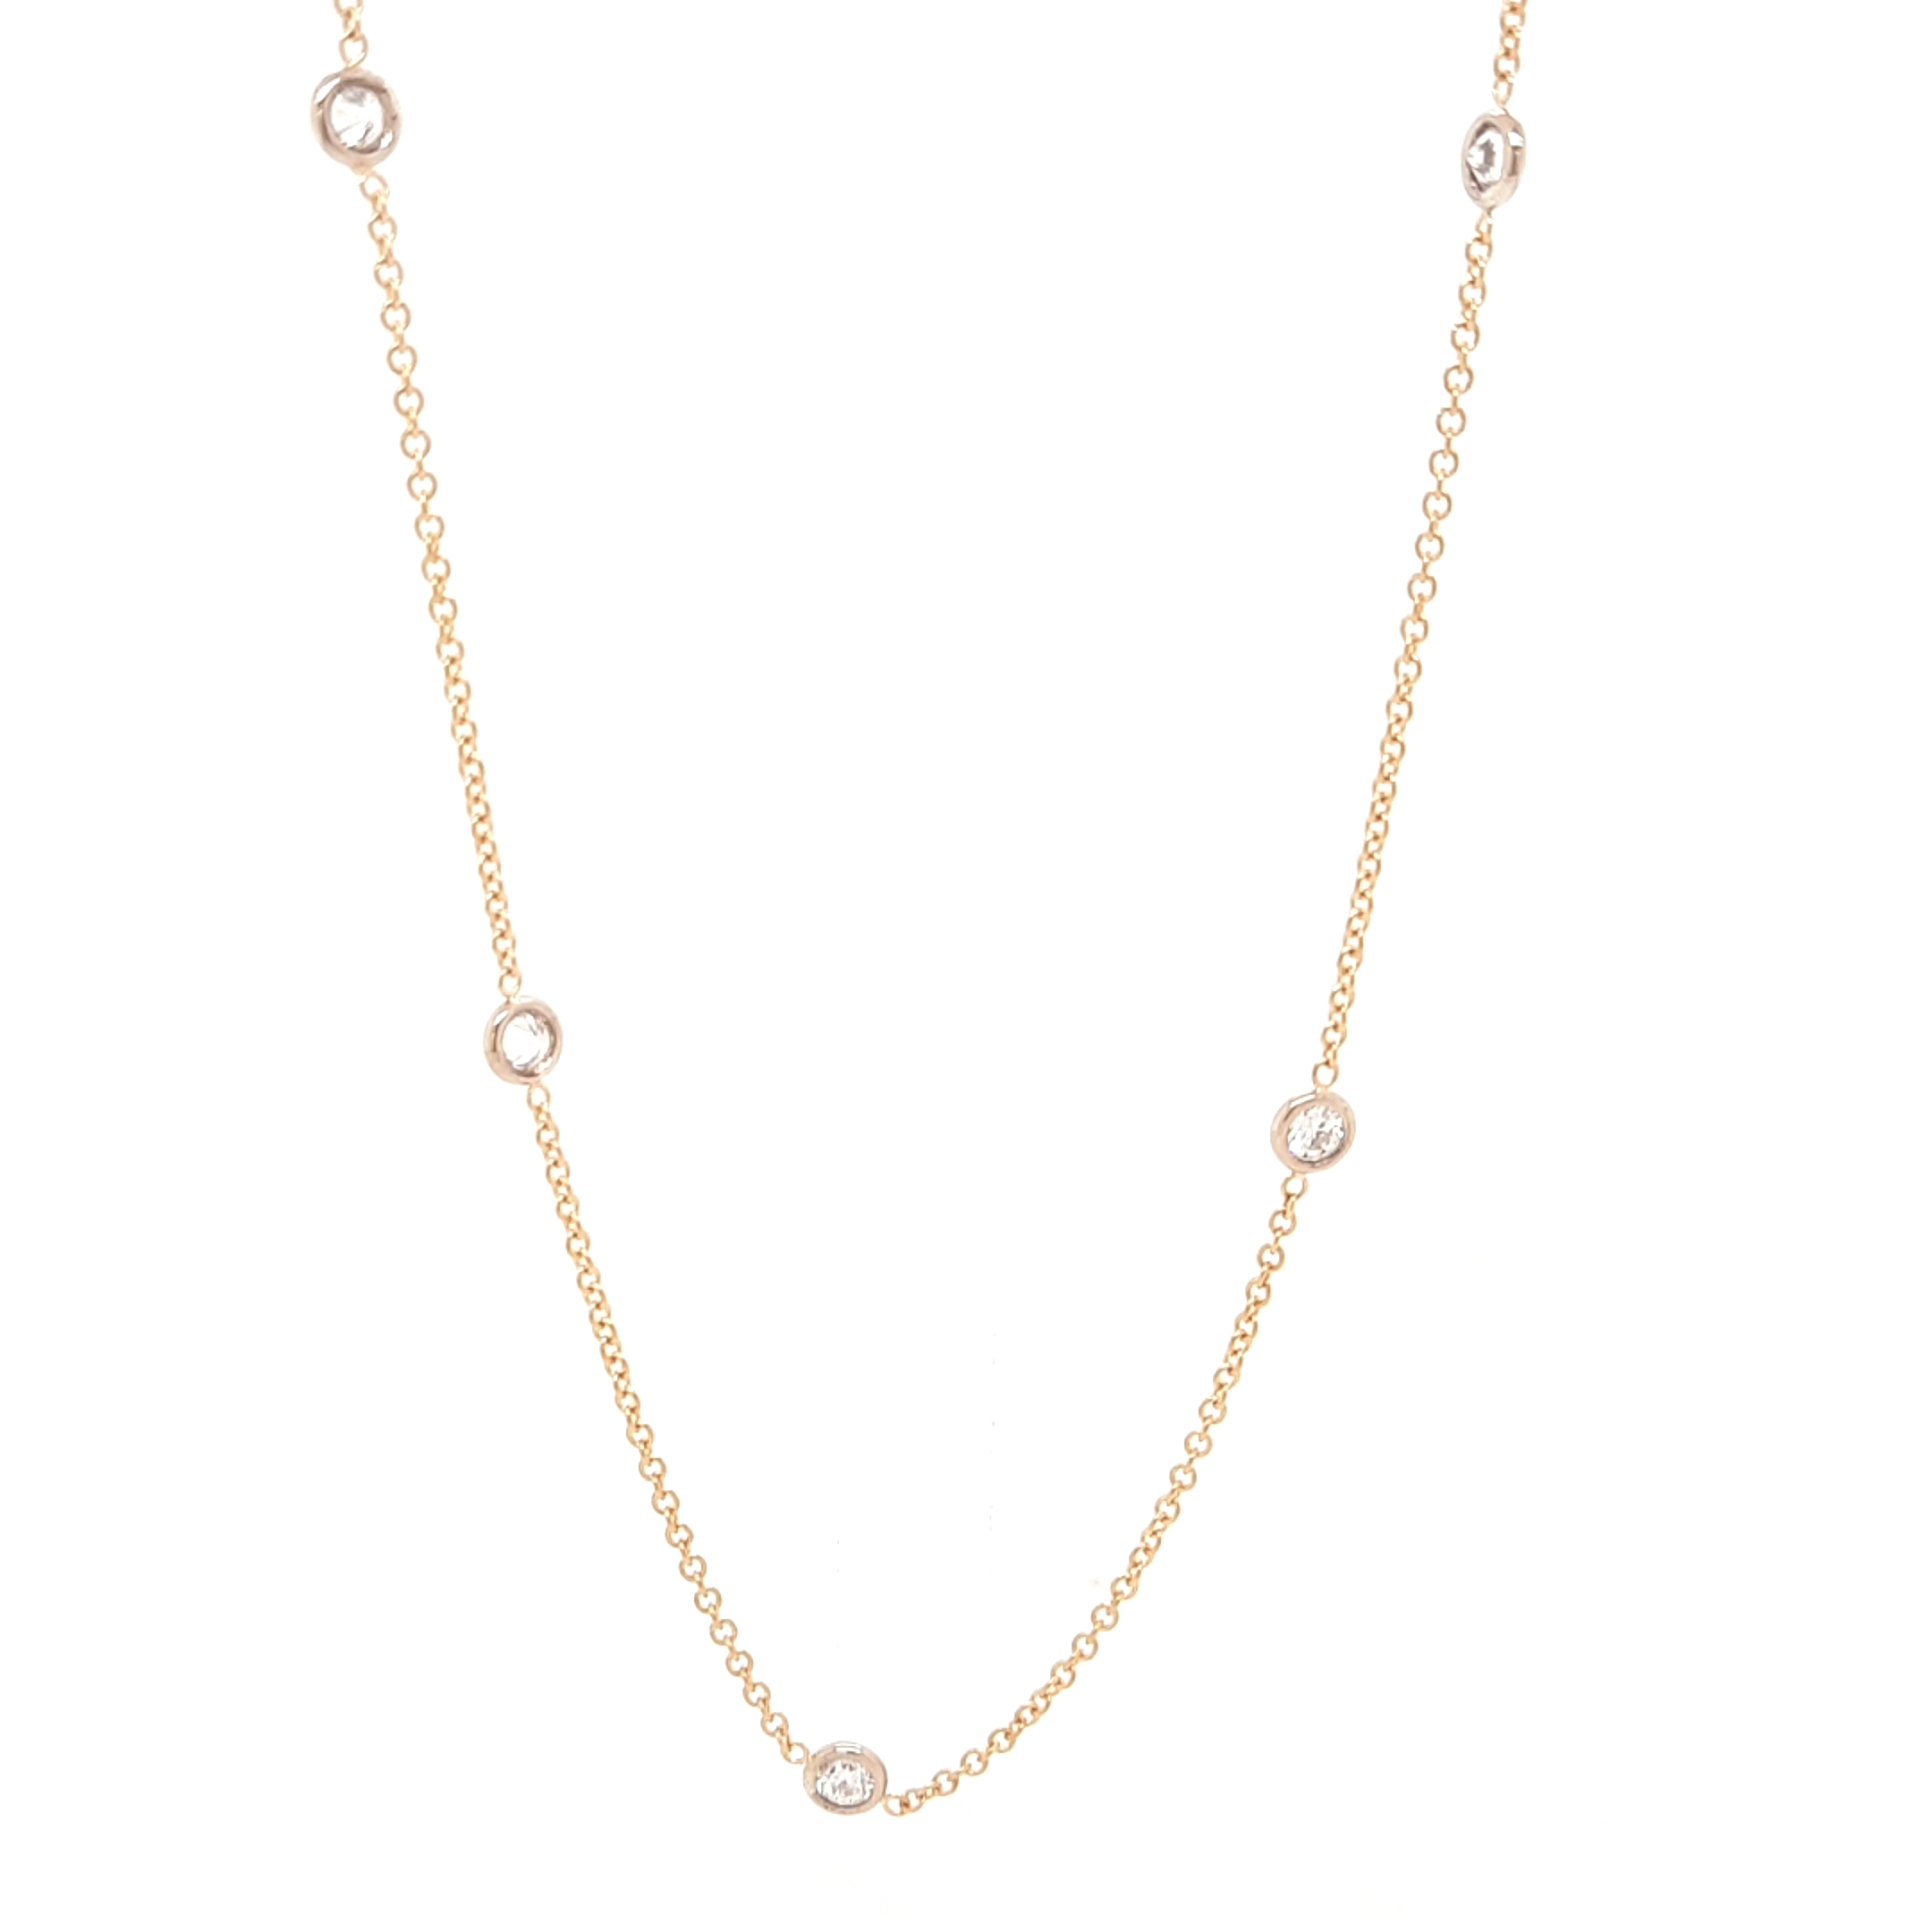 Fancy Champagne Diamond By The Yard Necklace 36 Inch 1.00 Carat 14k Yellow  Gold Long Necklace Handmade